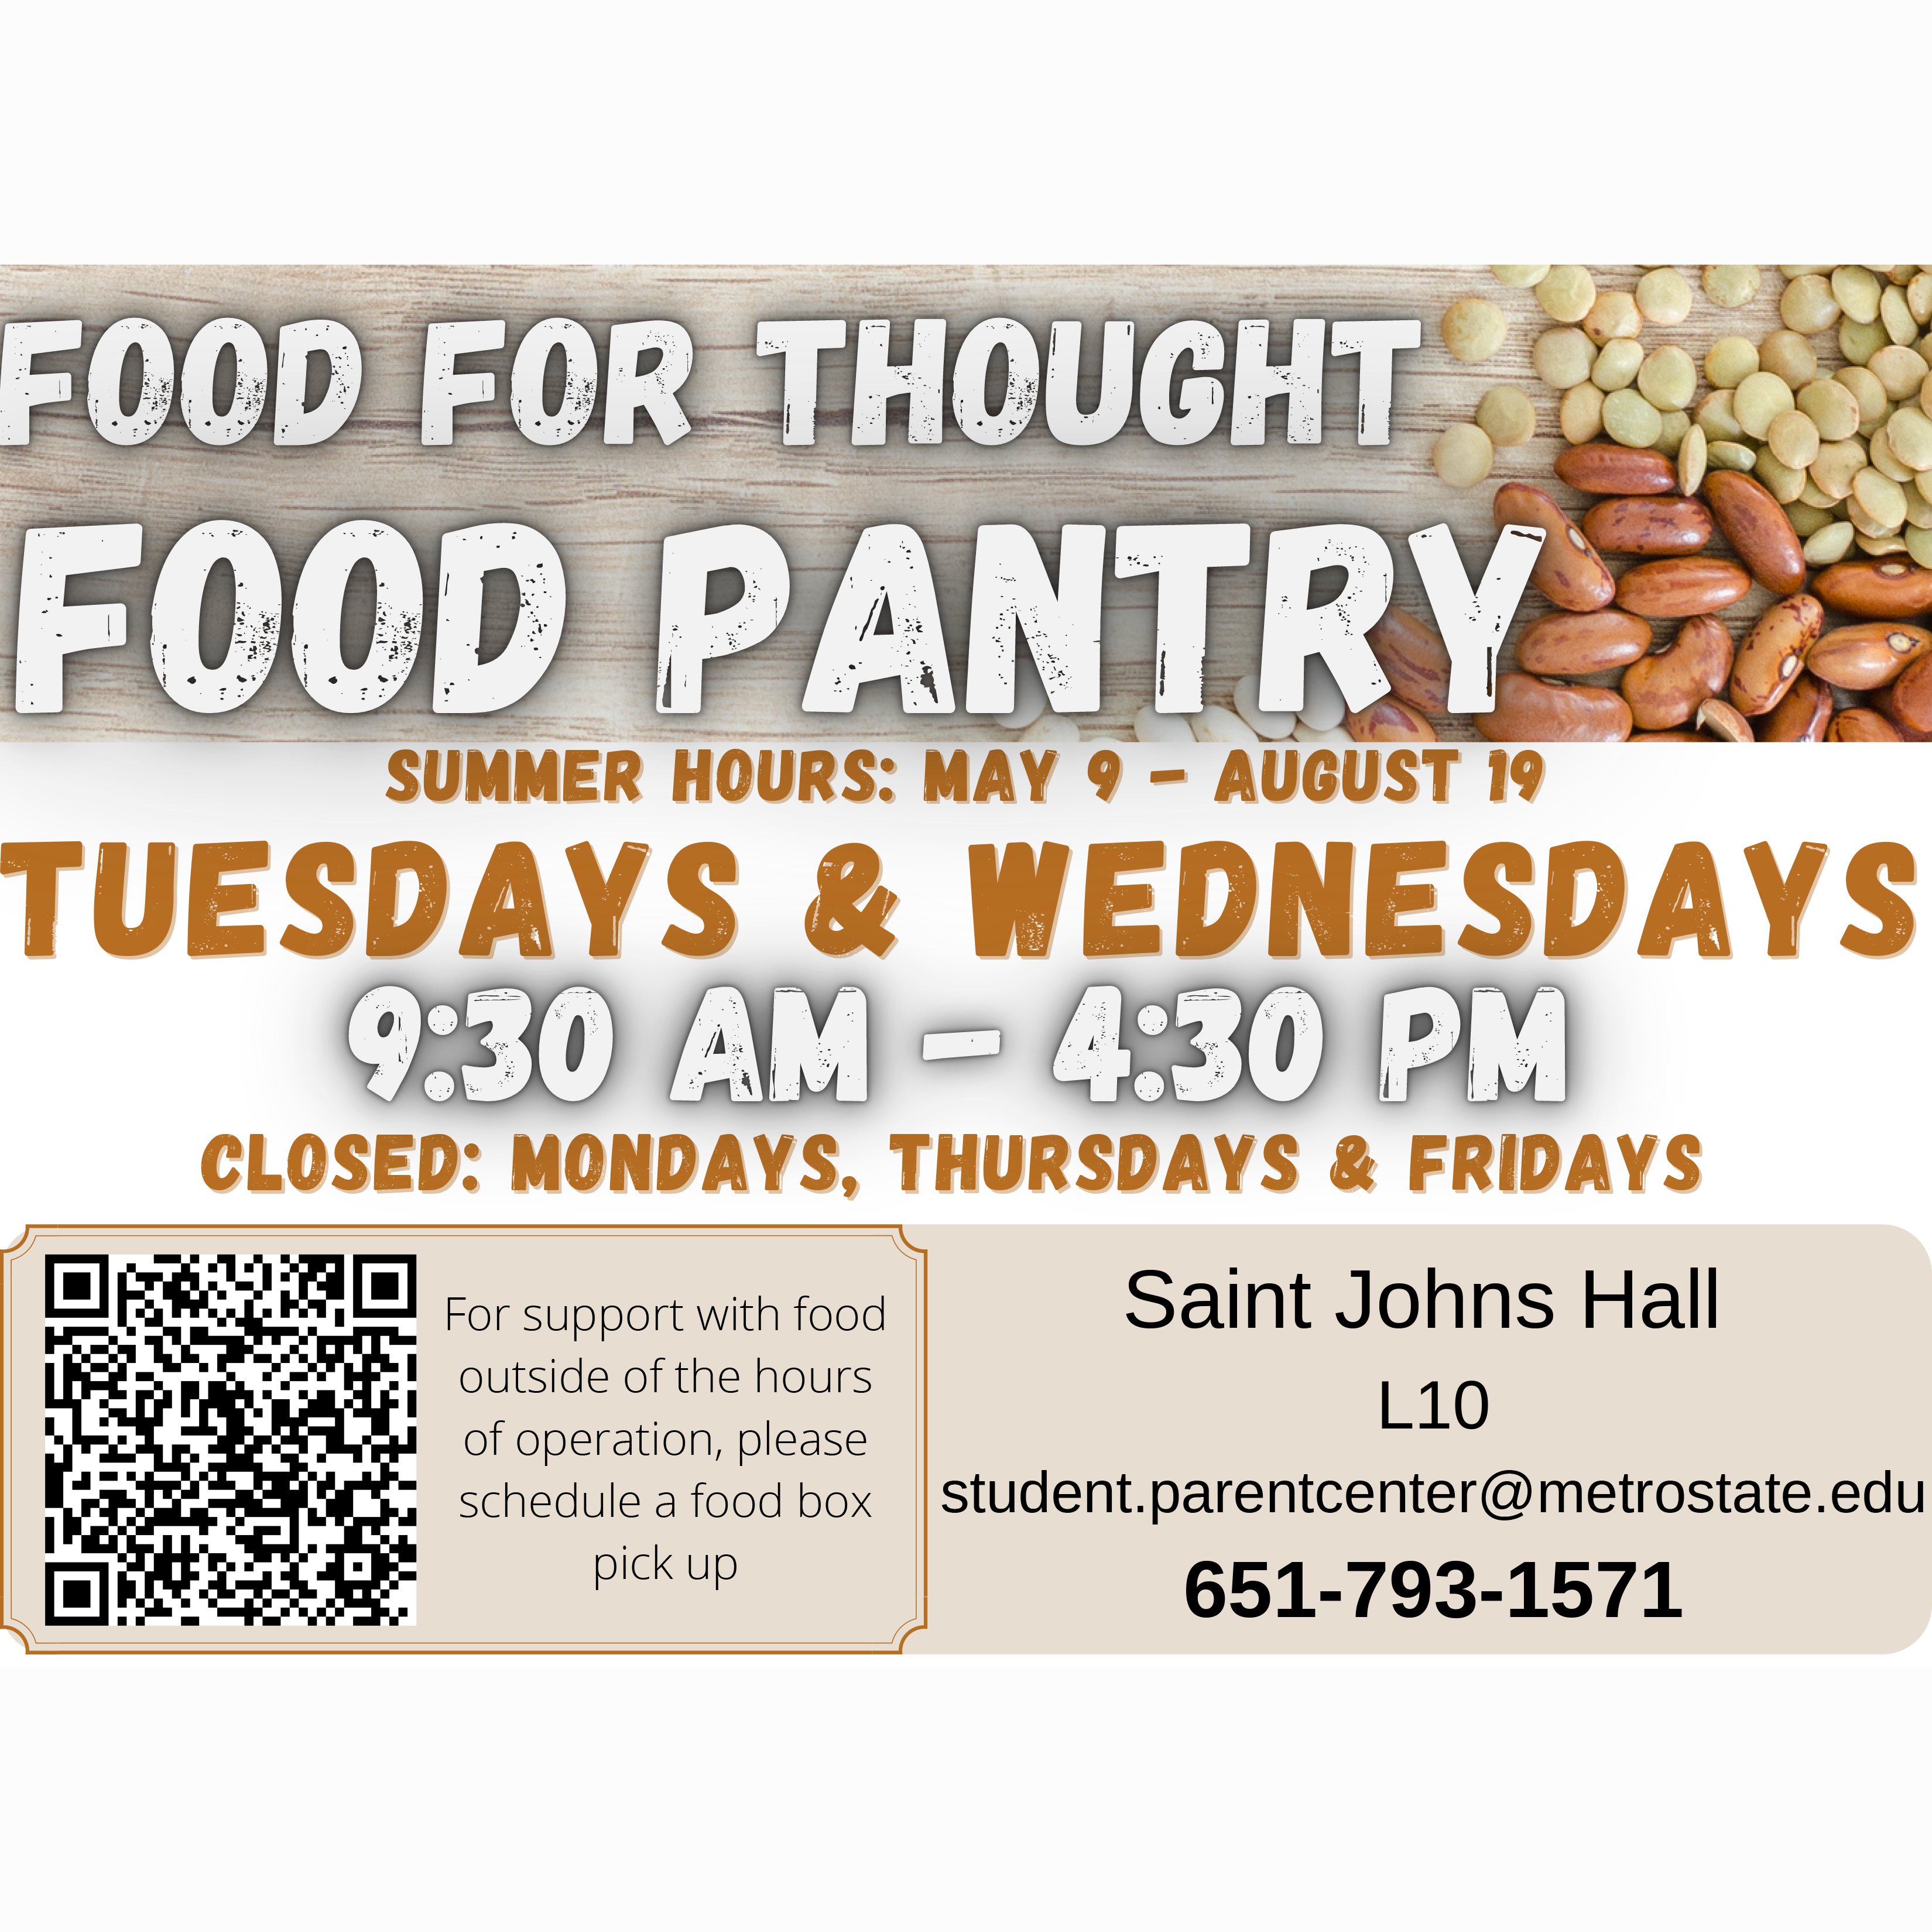 Image containing the Food for Thought food pantry's summer hours of operation in 2022.